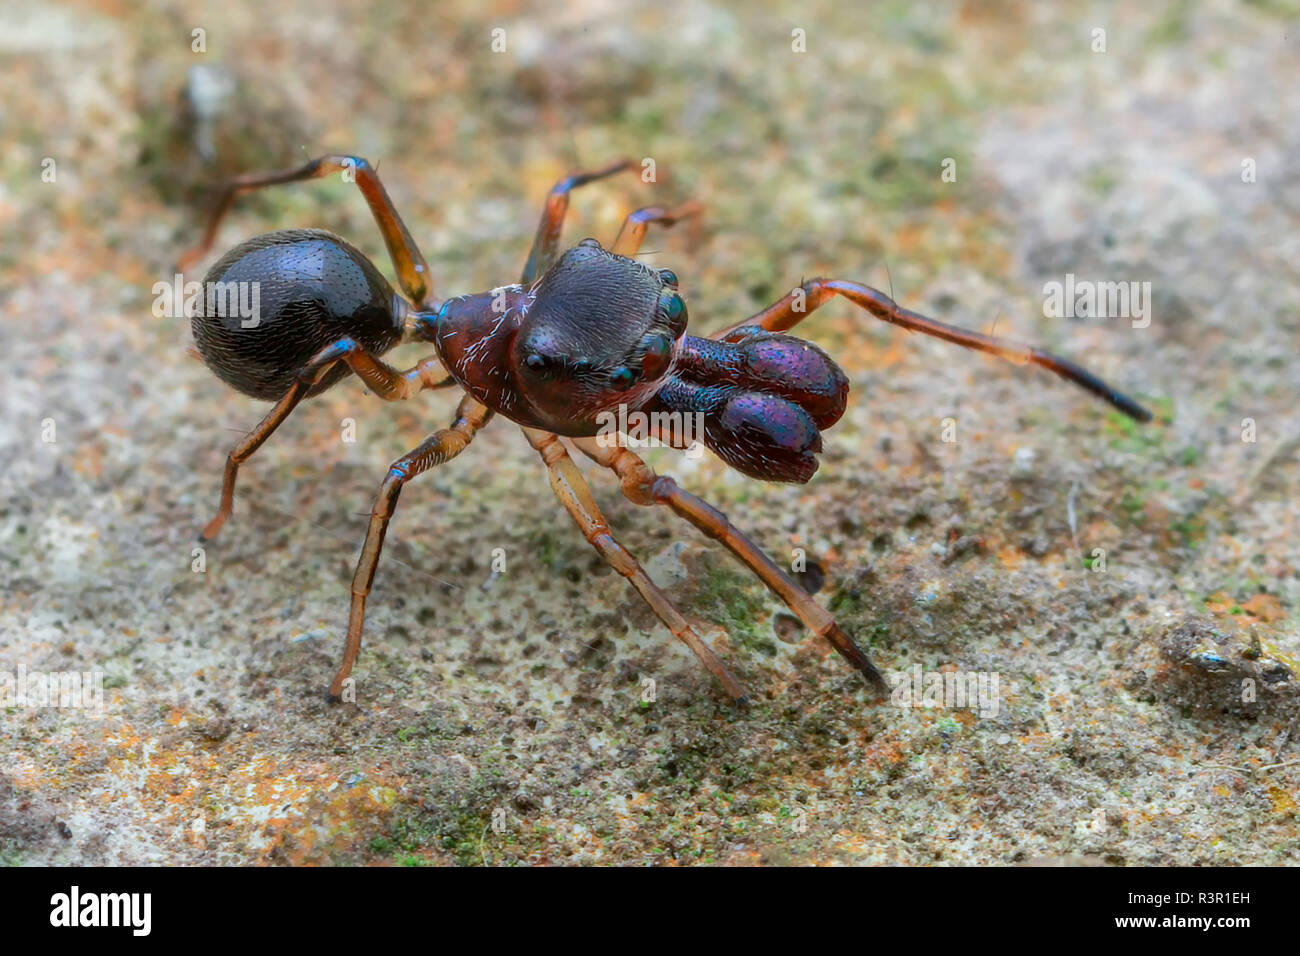 High angle shot of a male ant-mimicking jumping spider (Salticidae - Myrmarachne sp.) Stock Photo